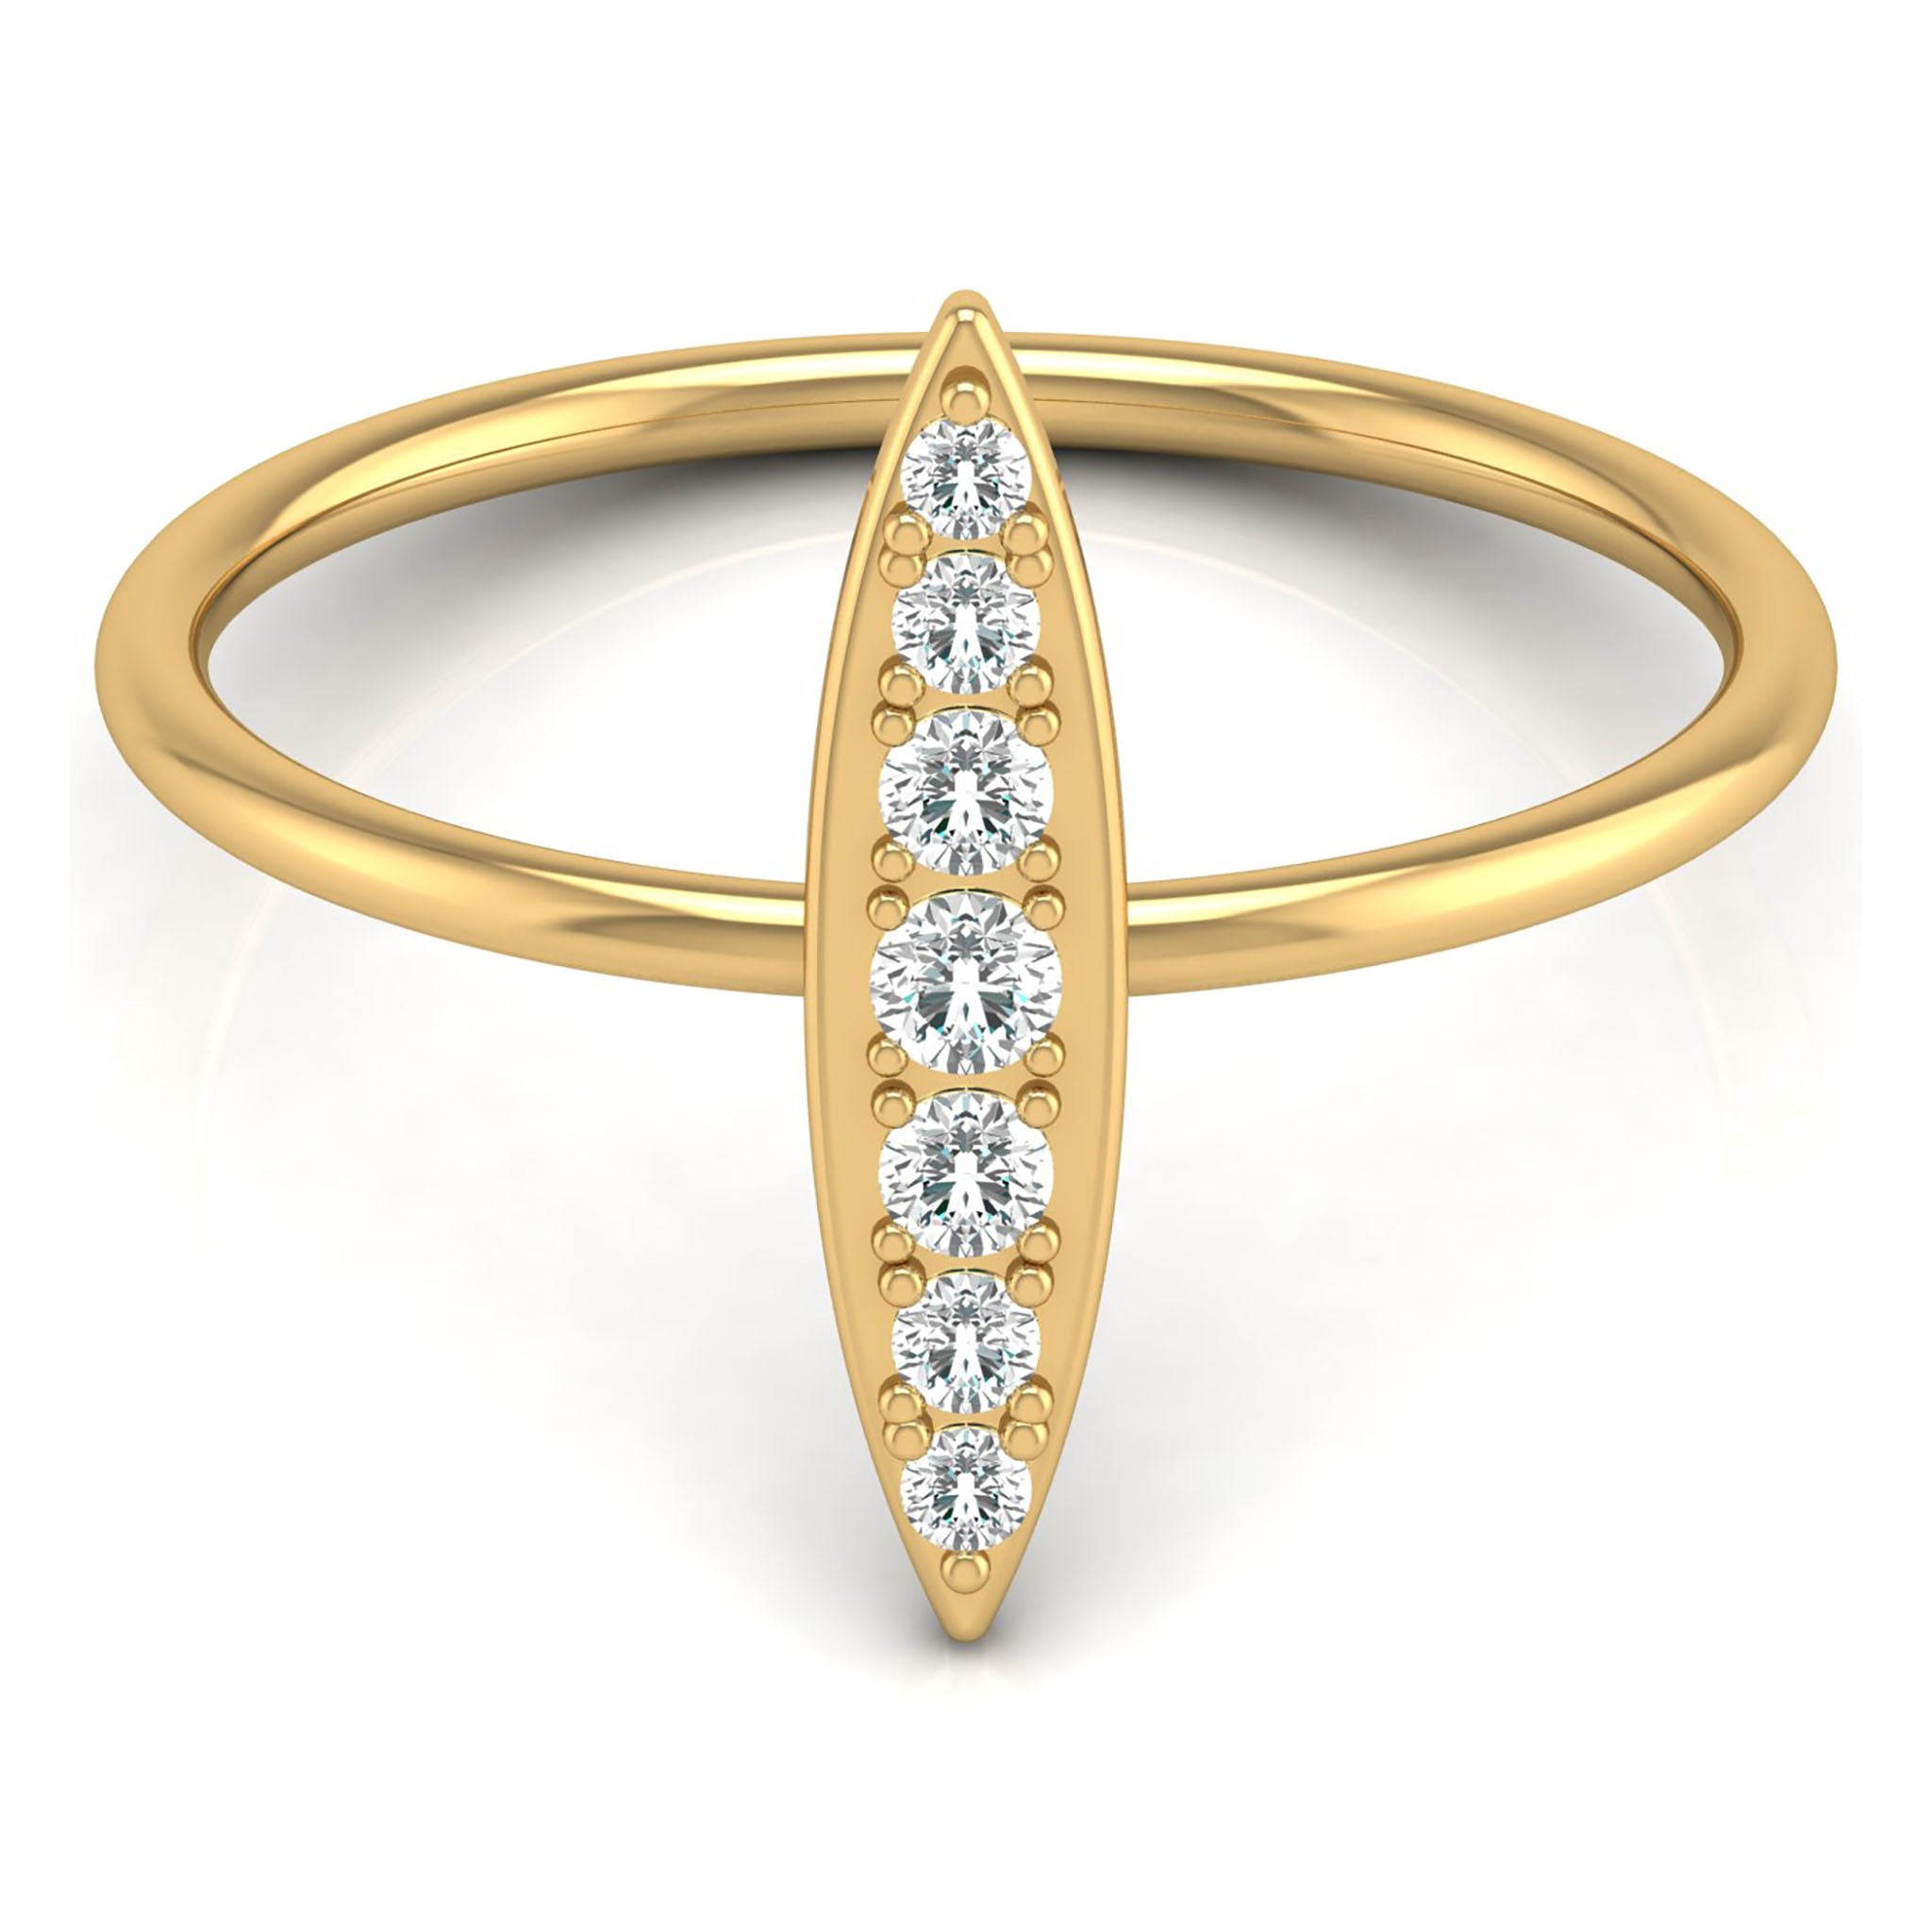 Seven-in Diamond Engagement Ring - S25